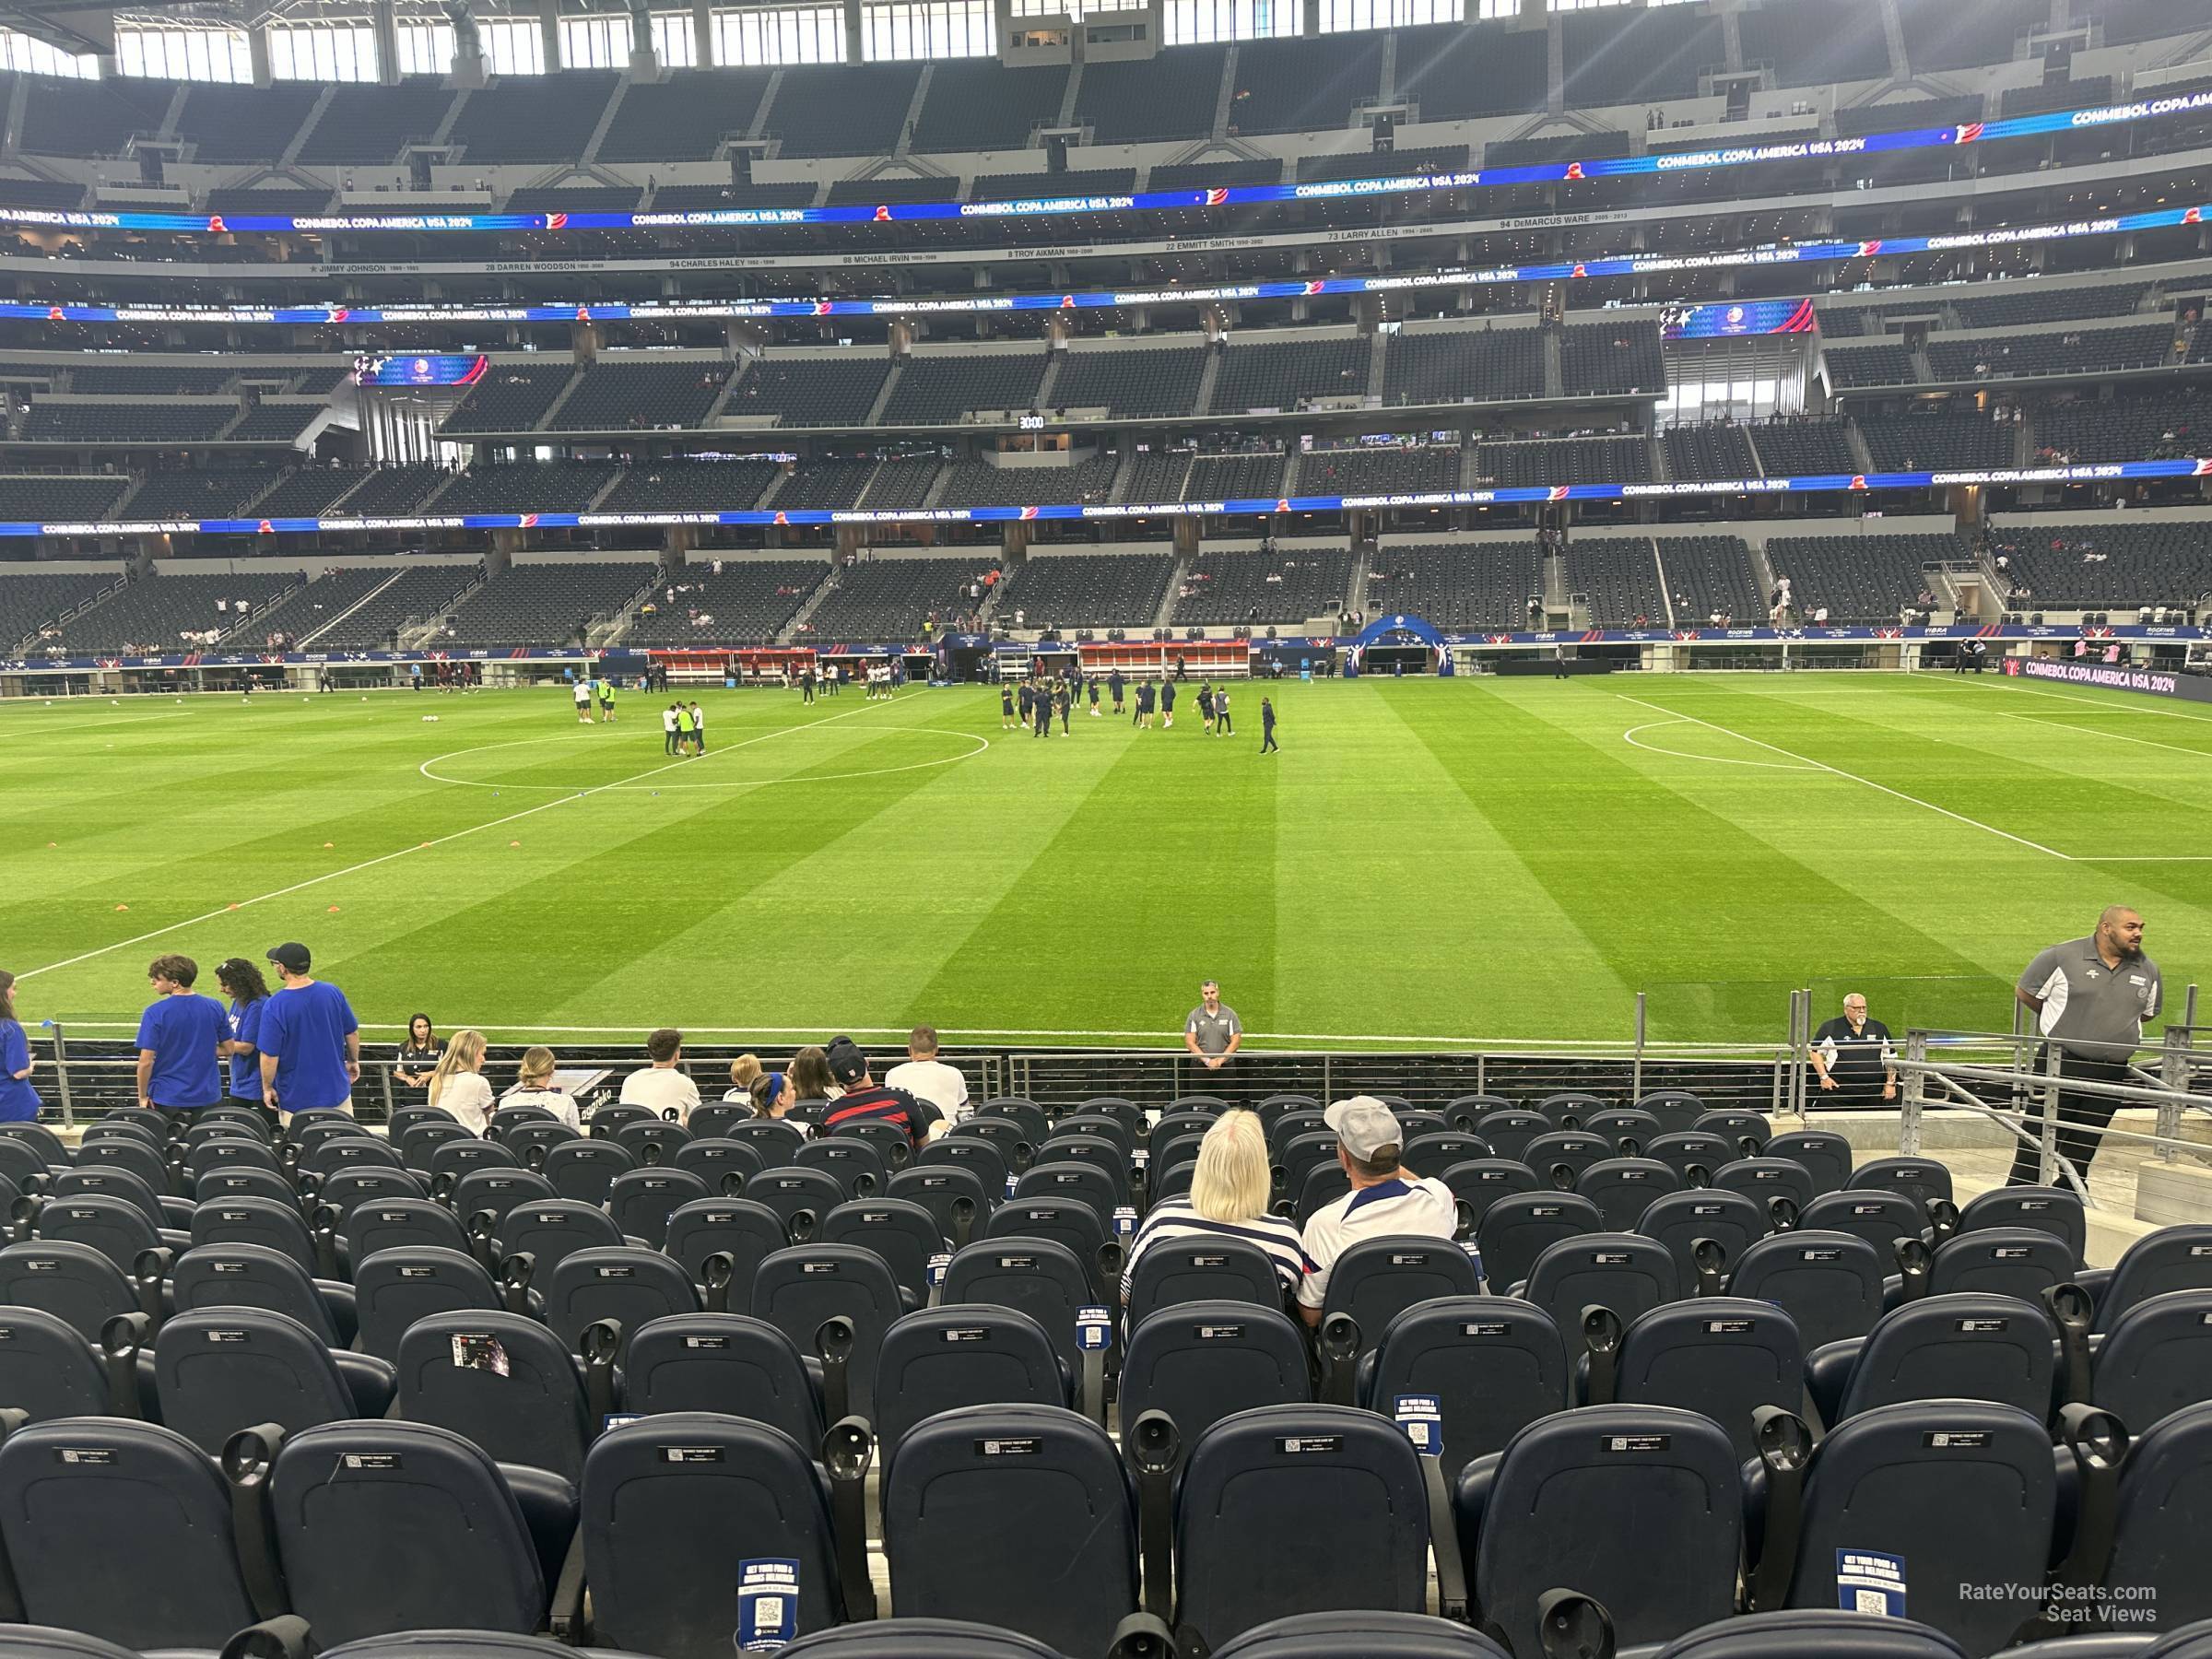 section c109, row 11 seat view  for soccer - at&t stadium (cowboys stadium)